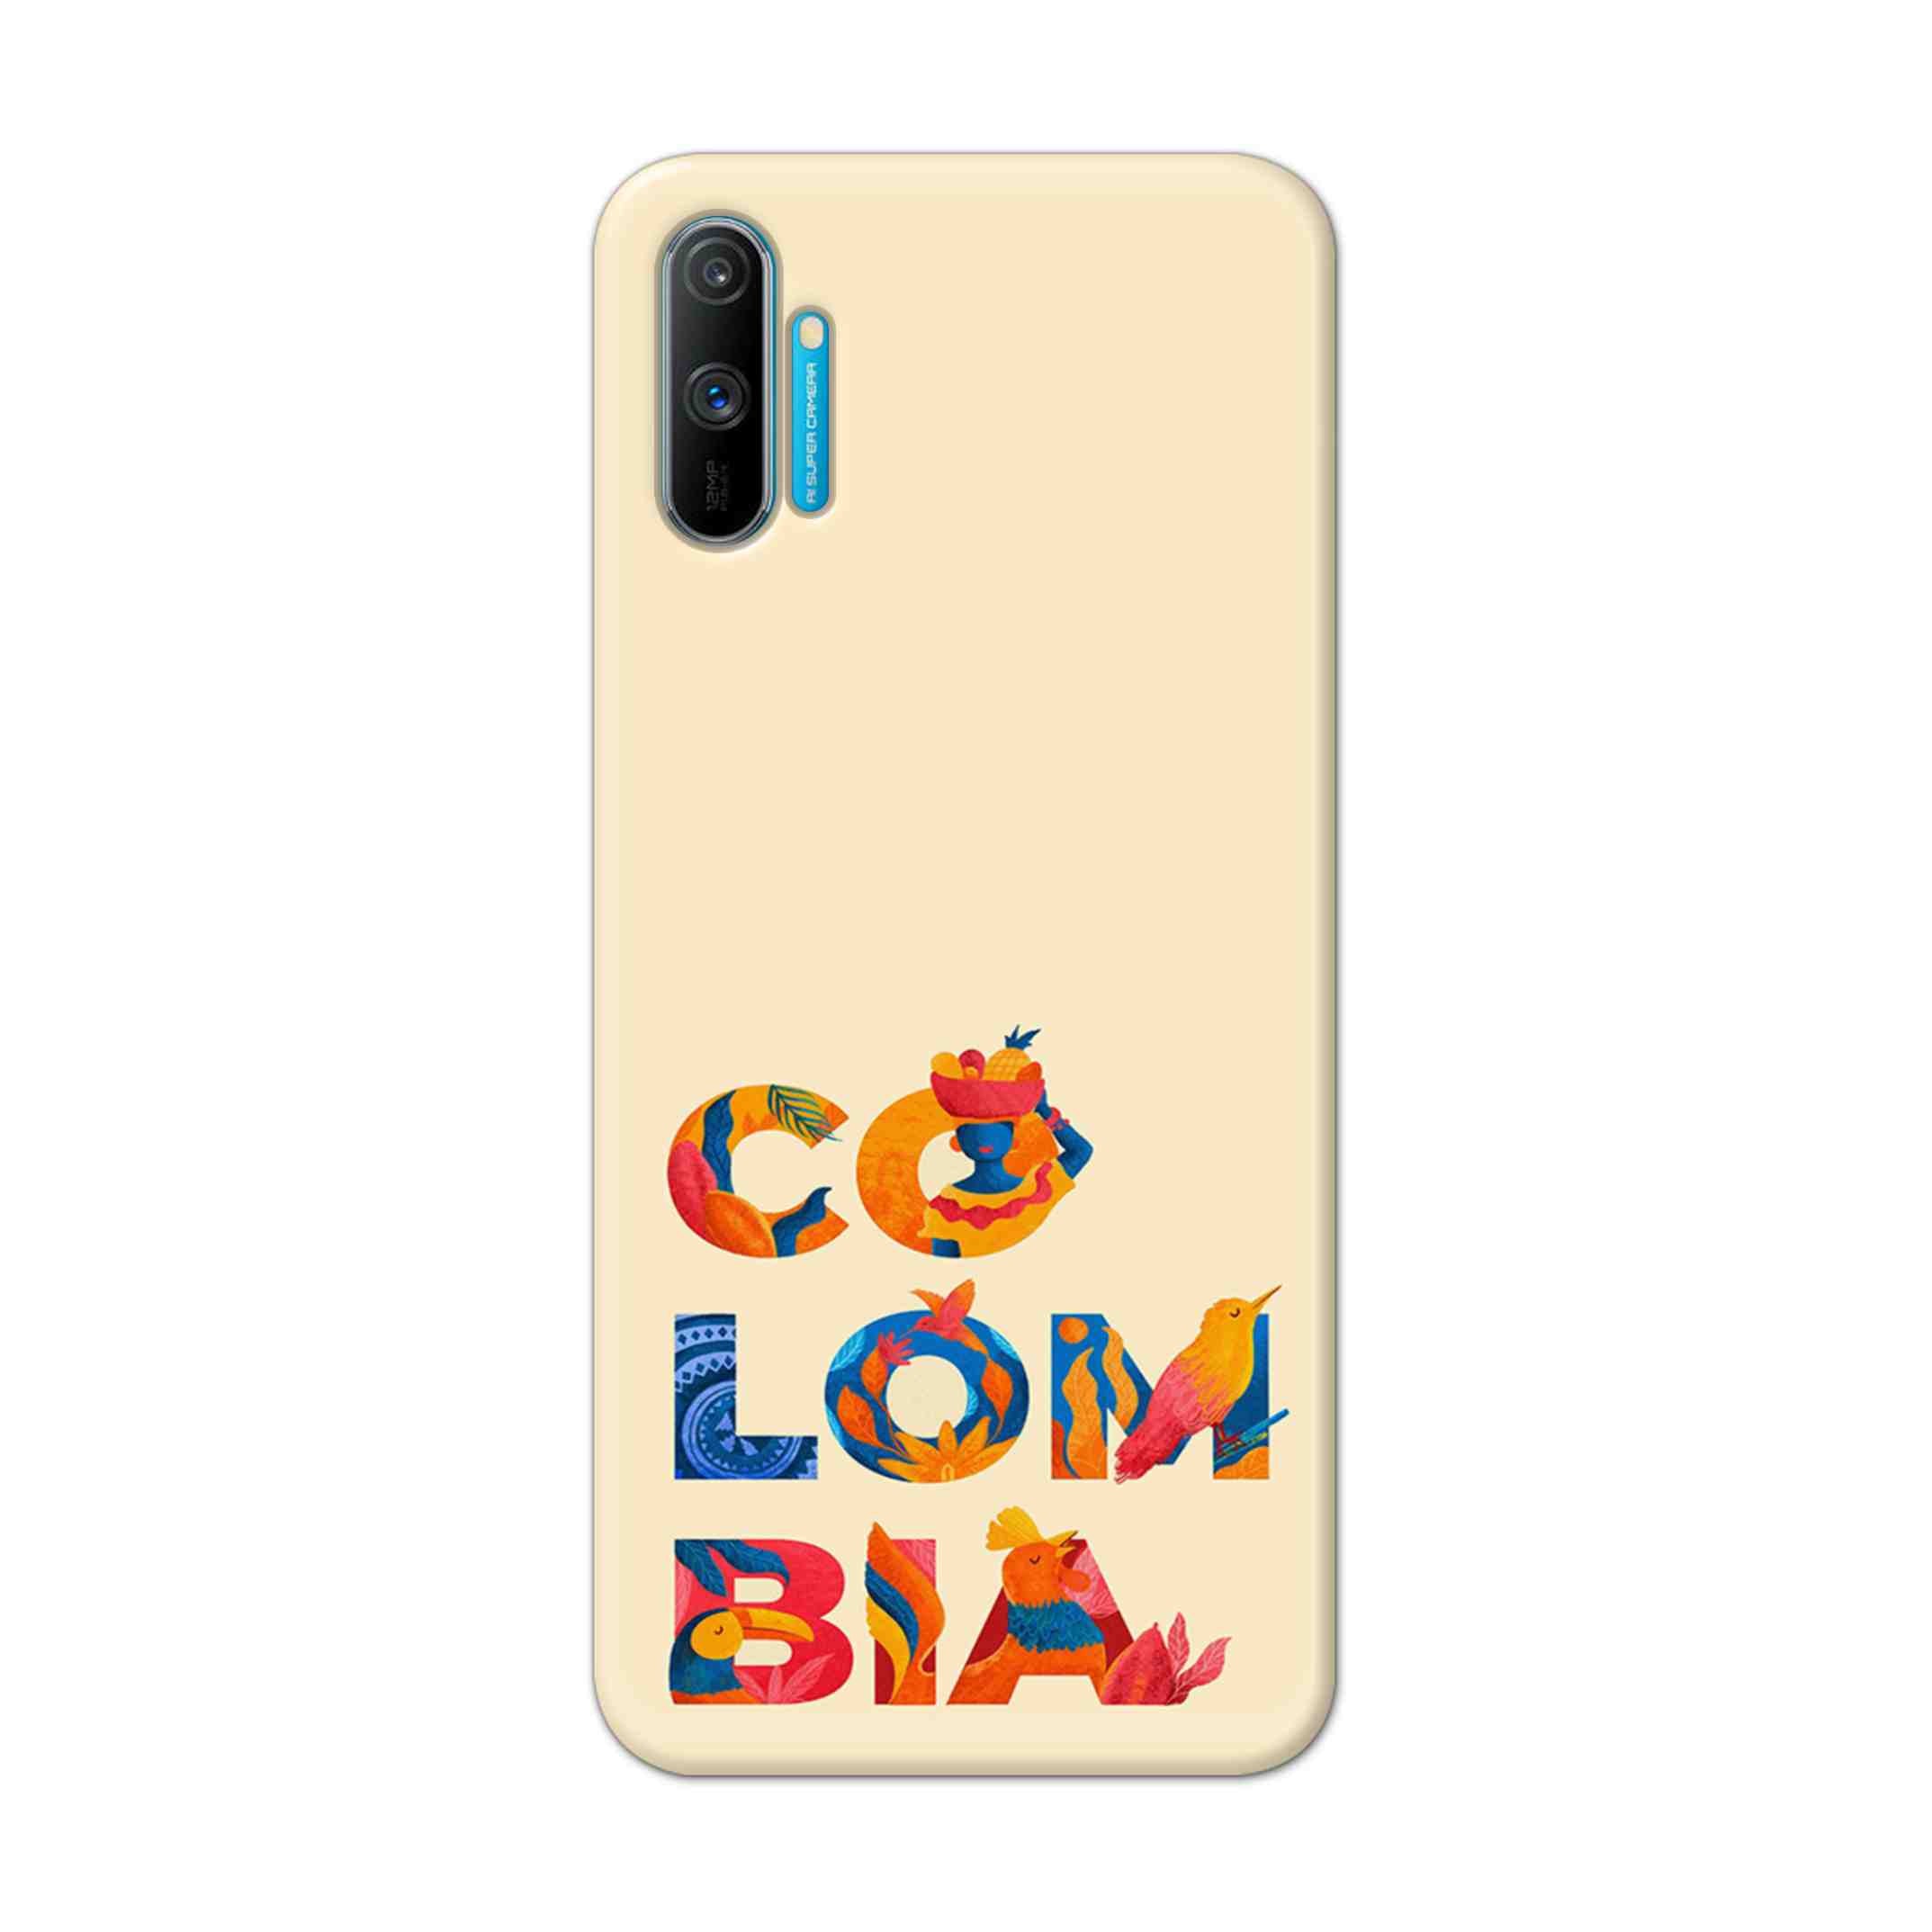 Buy Colombia Hard Back Mobile Phone Case Cover For Realme C3 Online